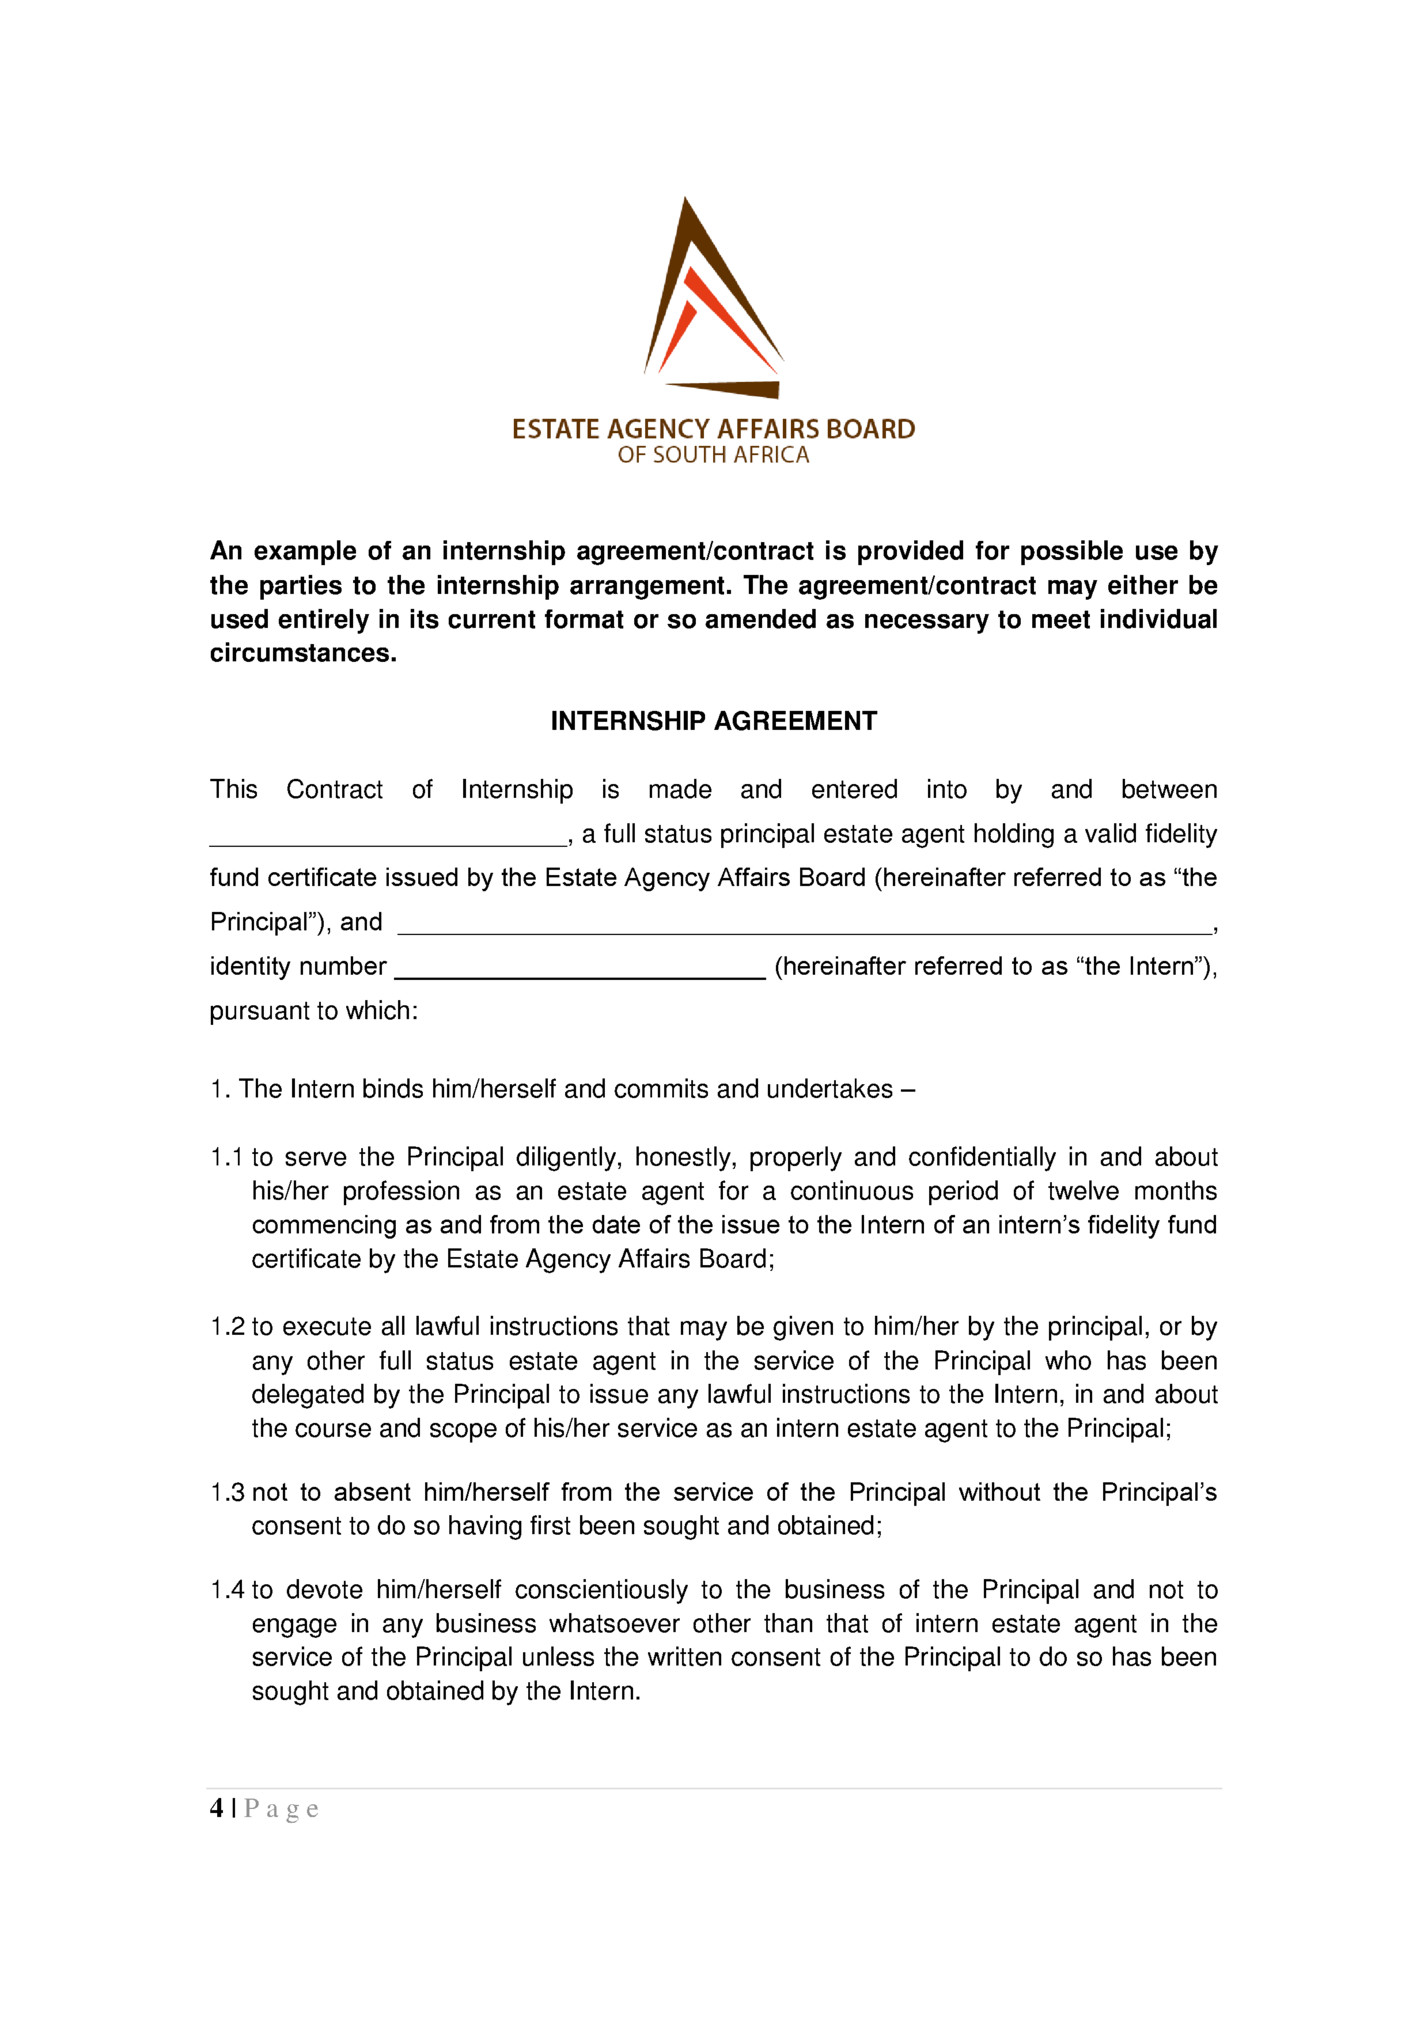 An example of an internship agreement/contract is provided for possible use by